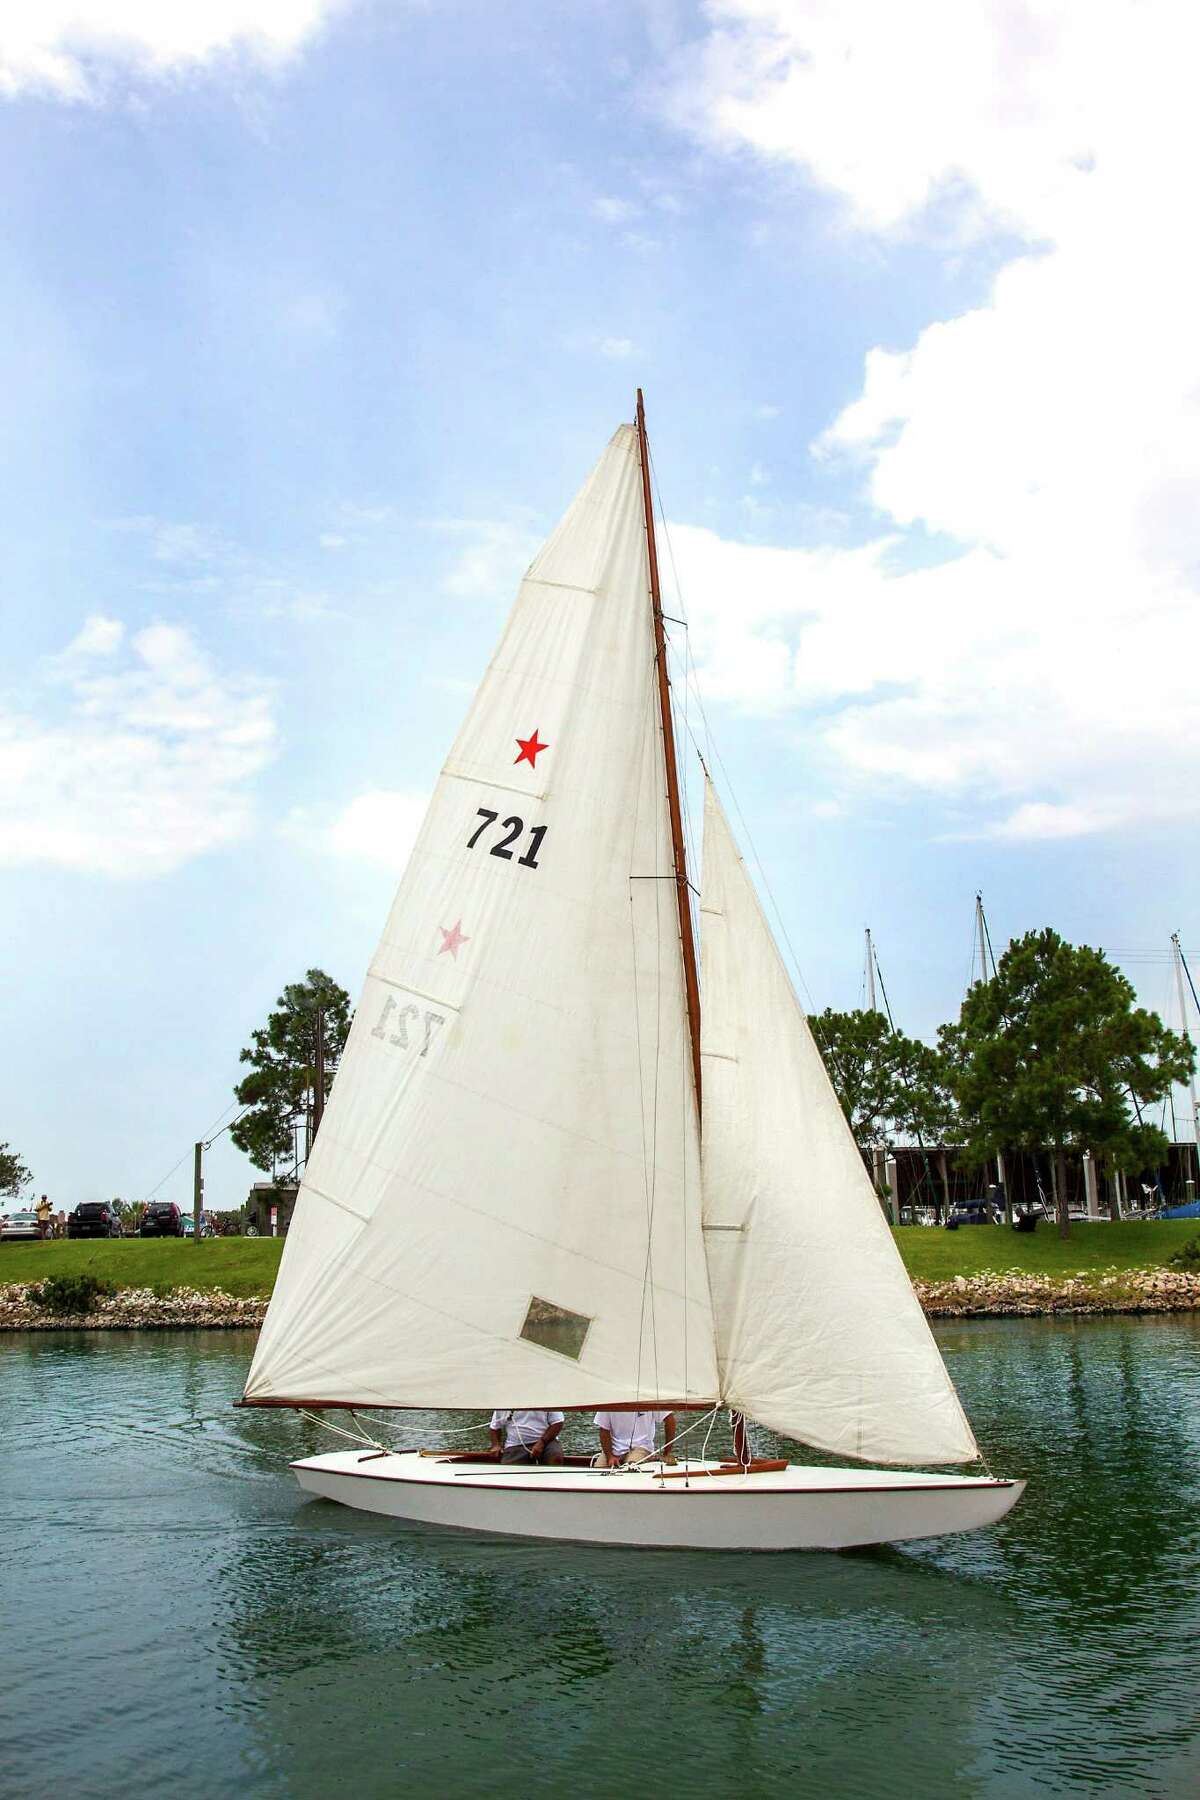 A Star Class Sailboat, the Flash II, was formerly owned by John F. Kennedy and his older brother Joseph.